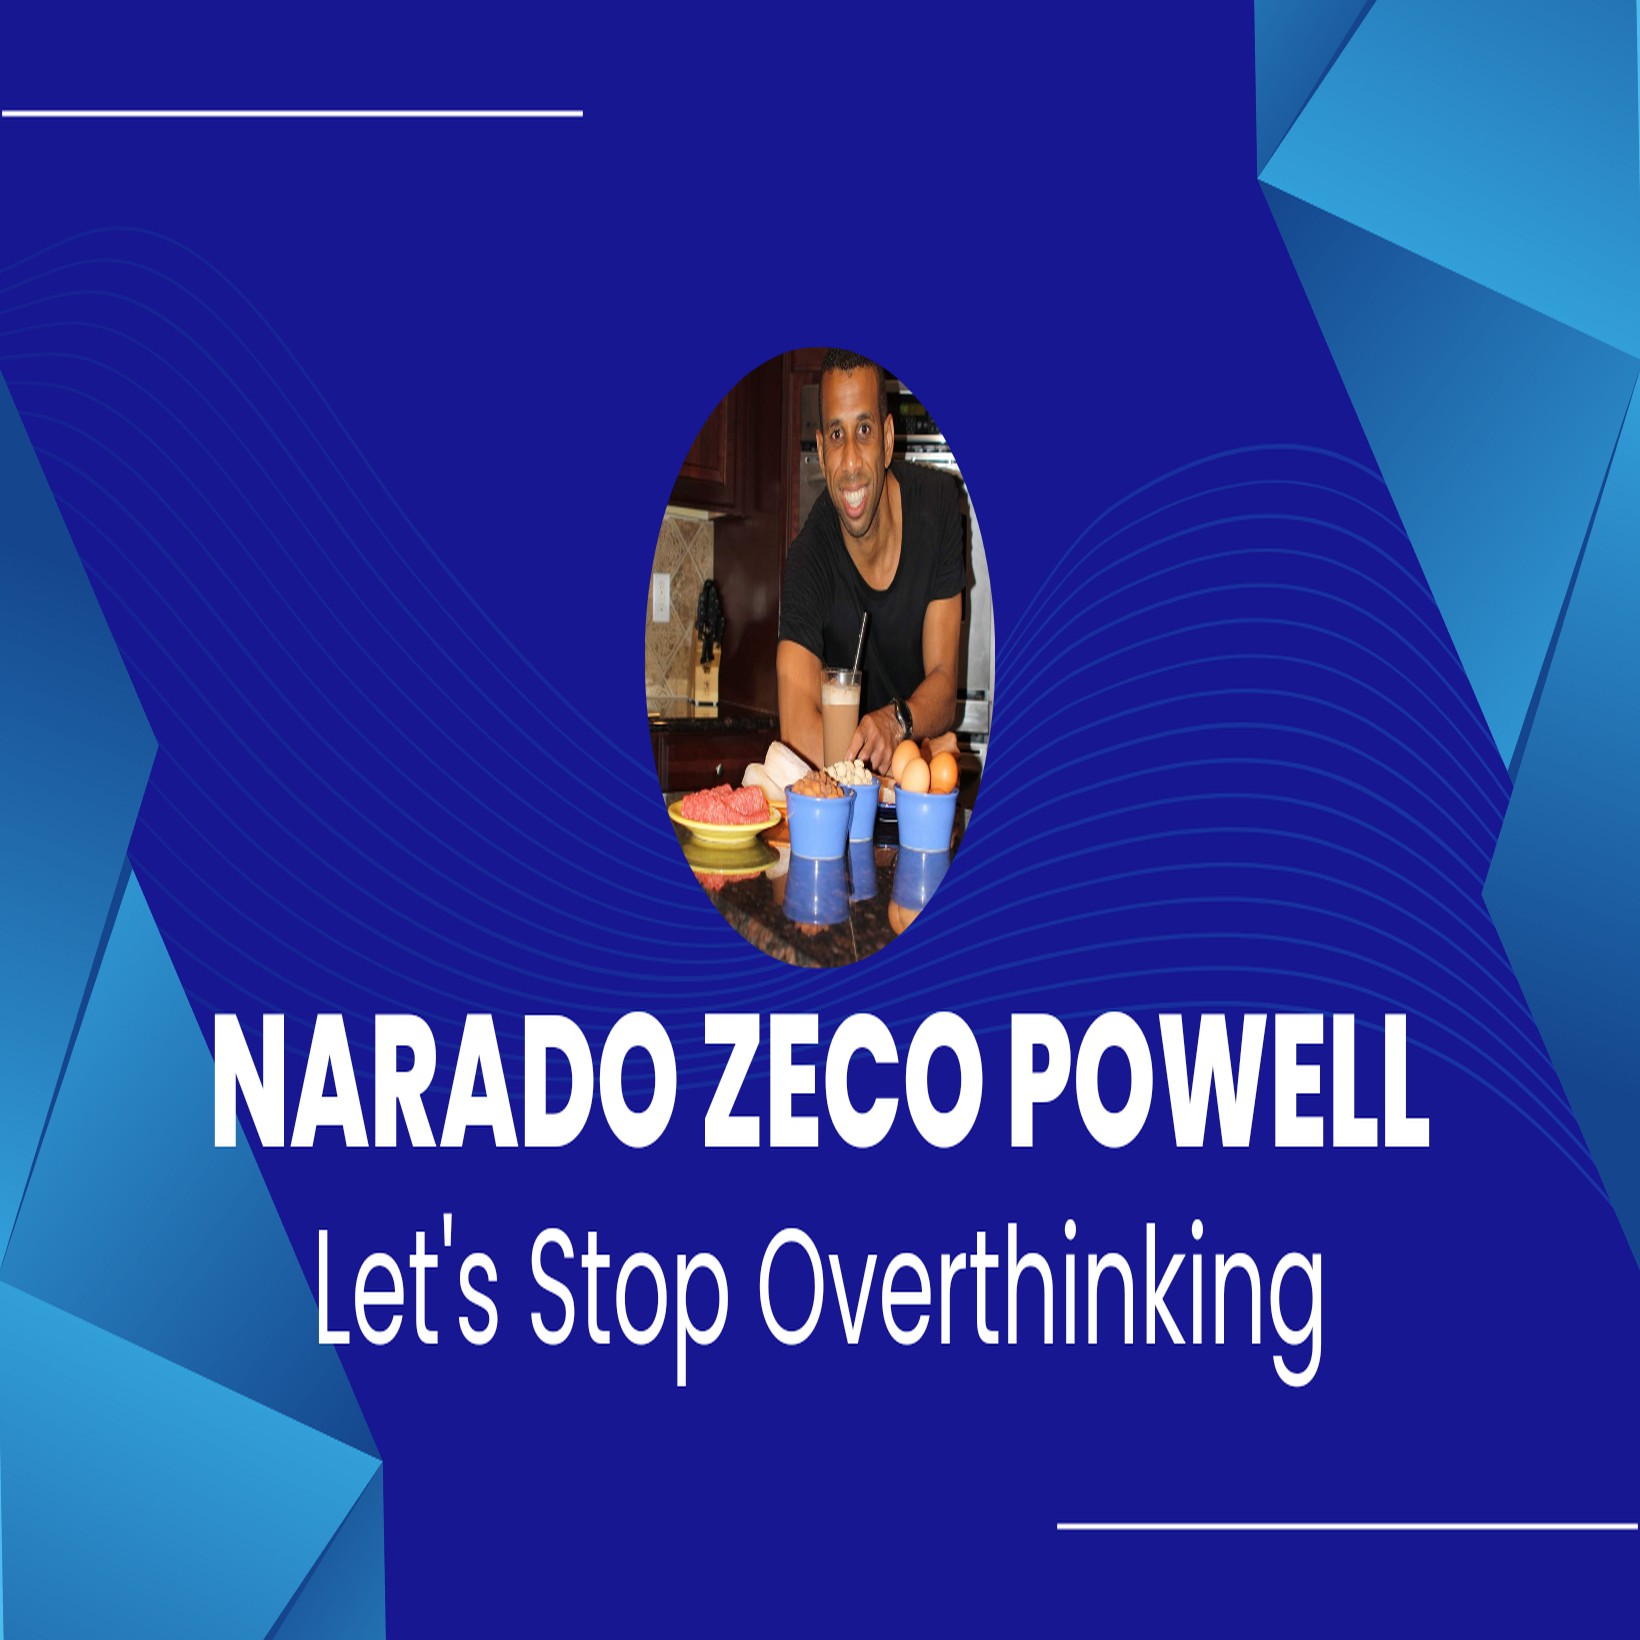 What To Do When You Are Overthinking|Narado Zeco Powell